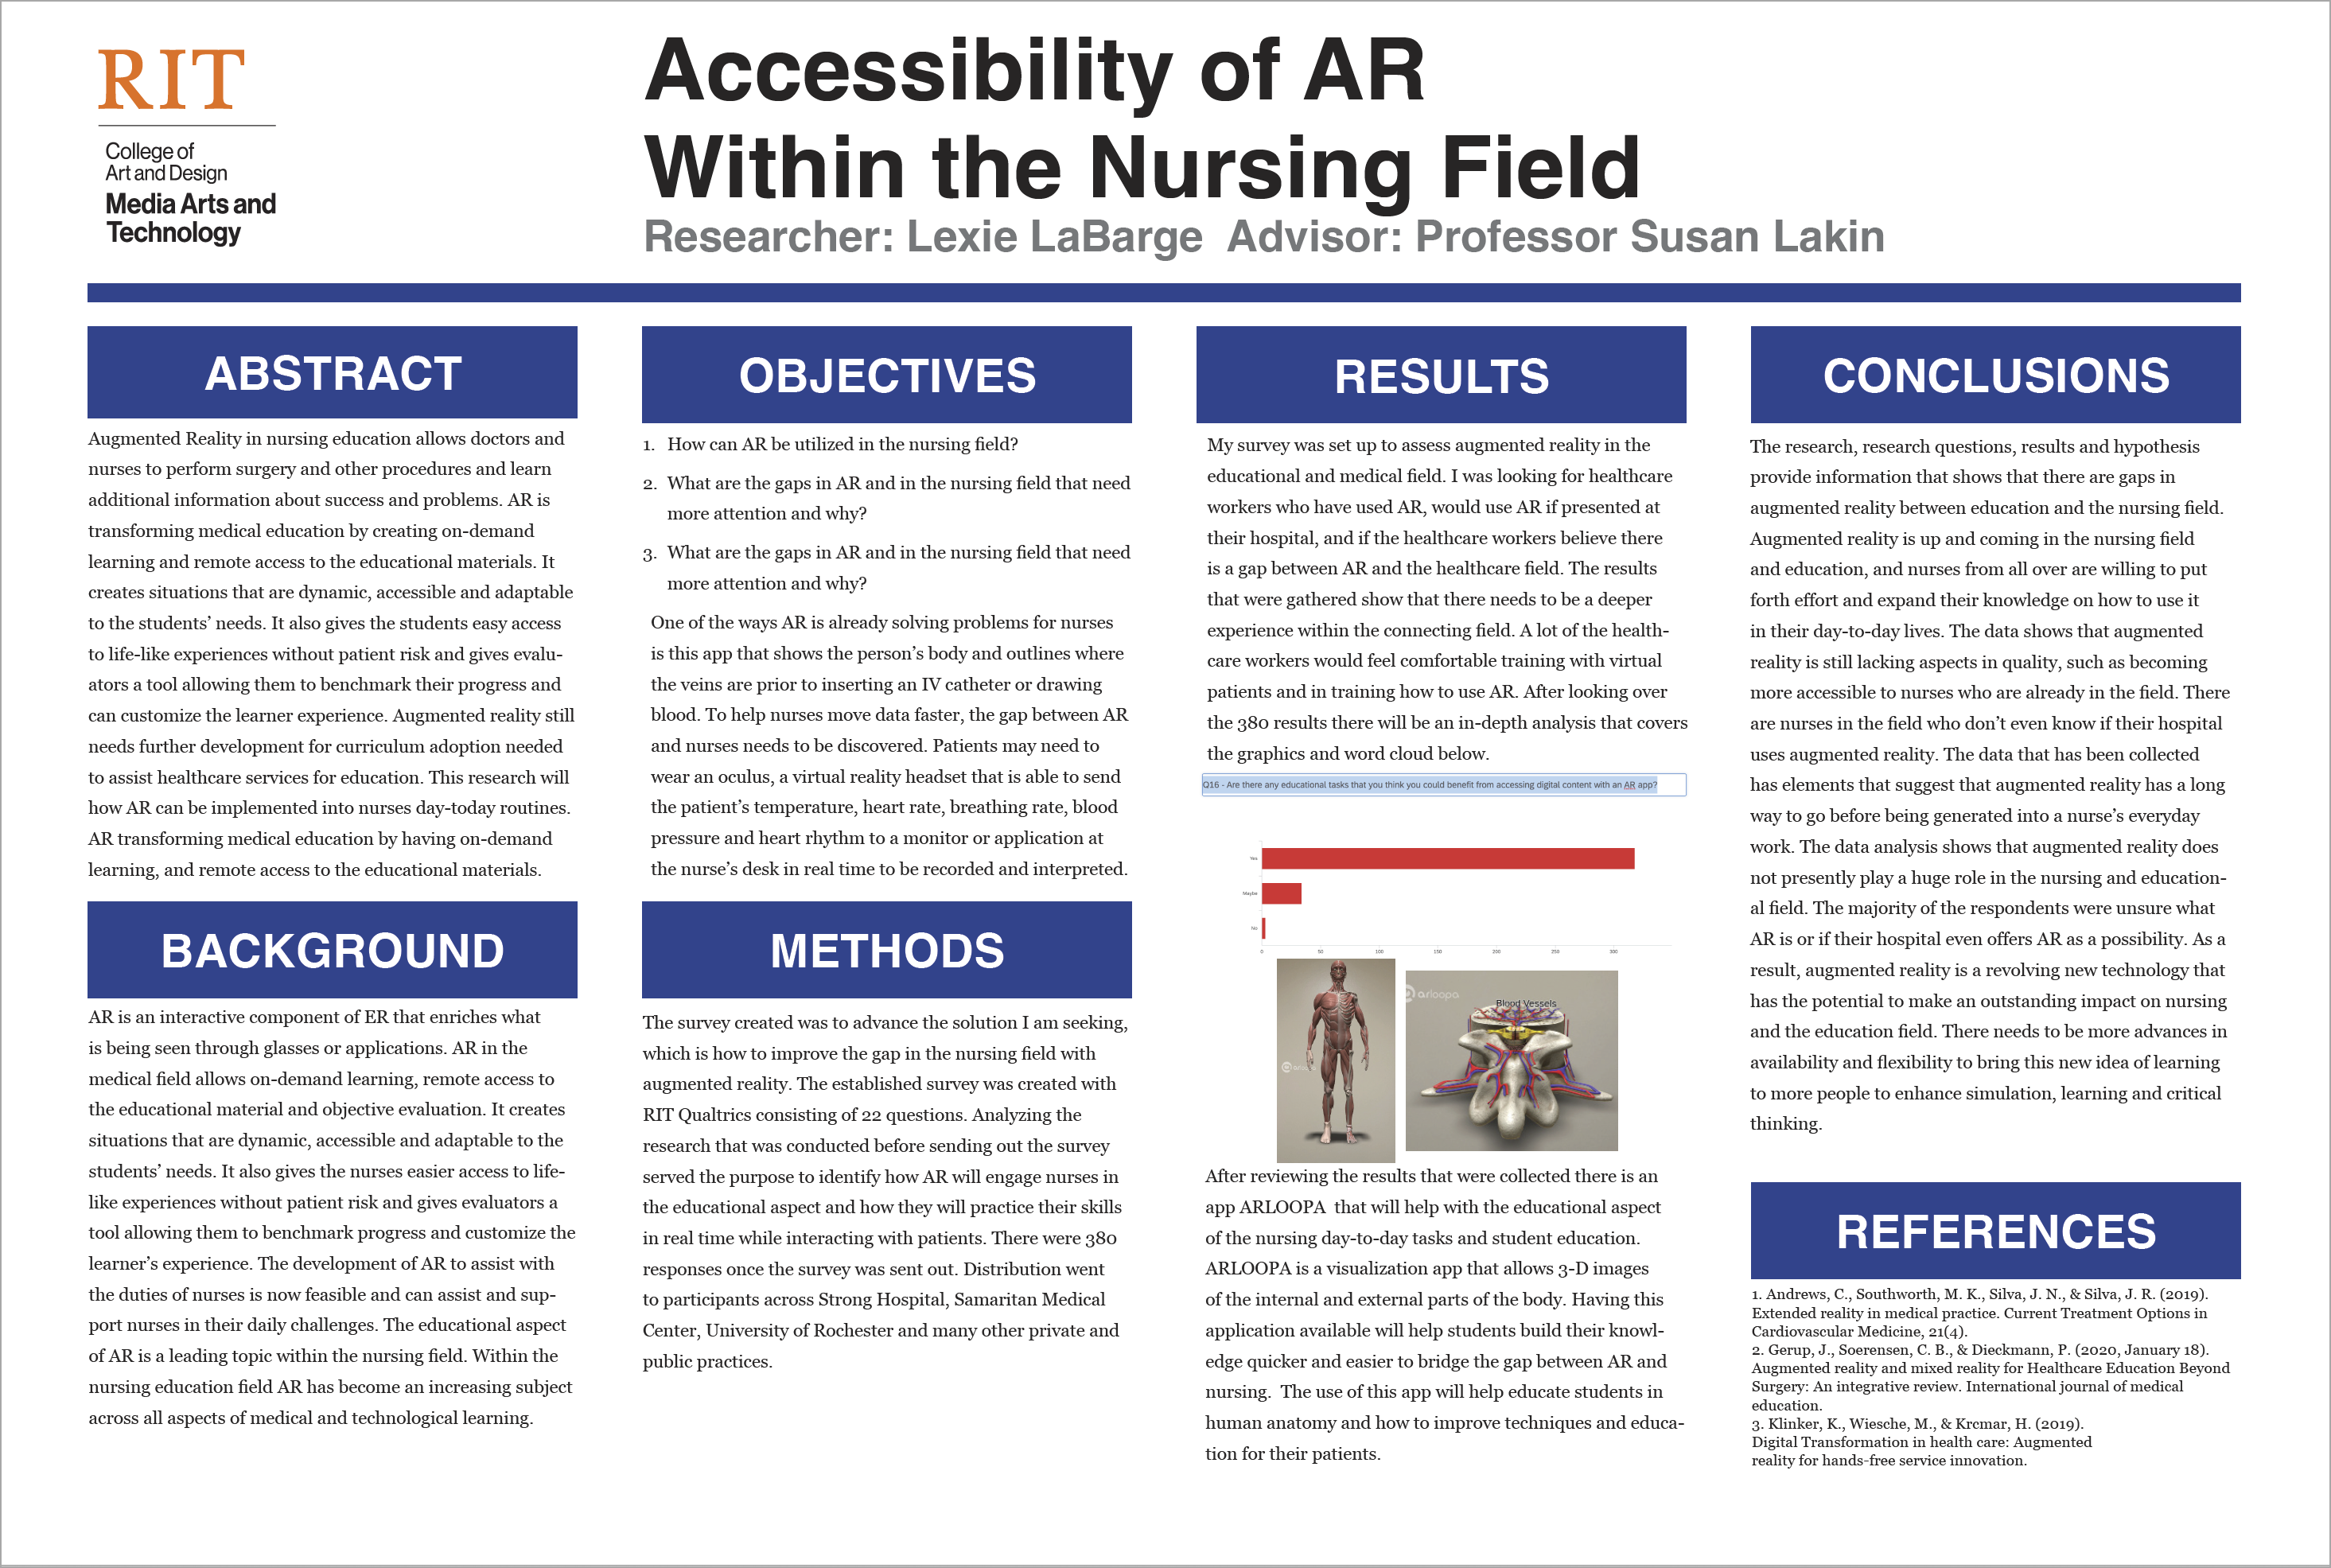 A poster highlighting research on accessibility of AR within the nursing field.